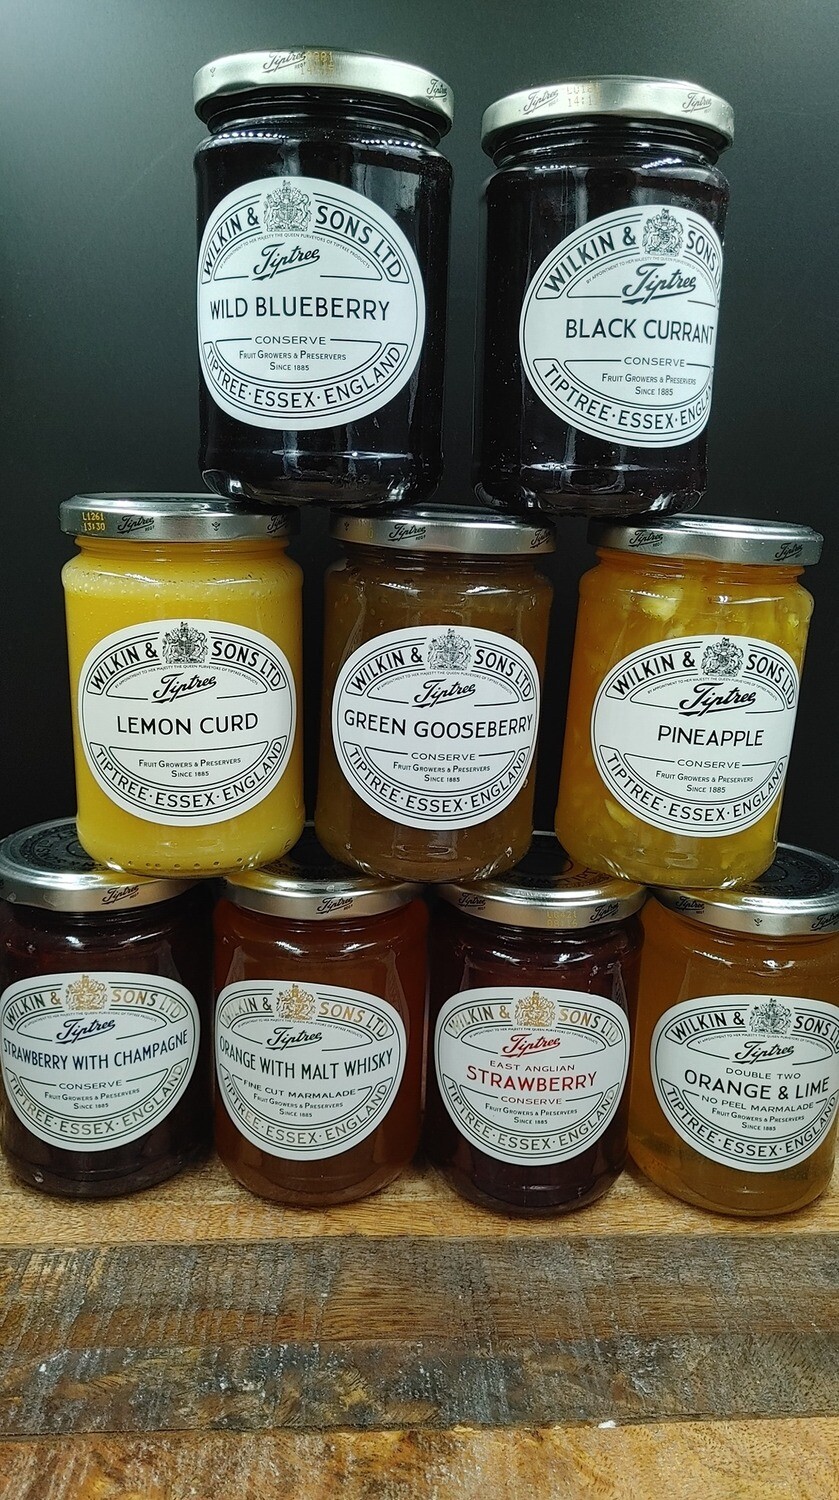 Tiptree Strawberry & Champagne Conserve 340g